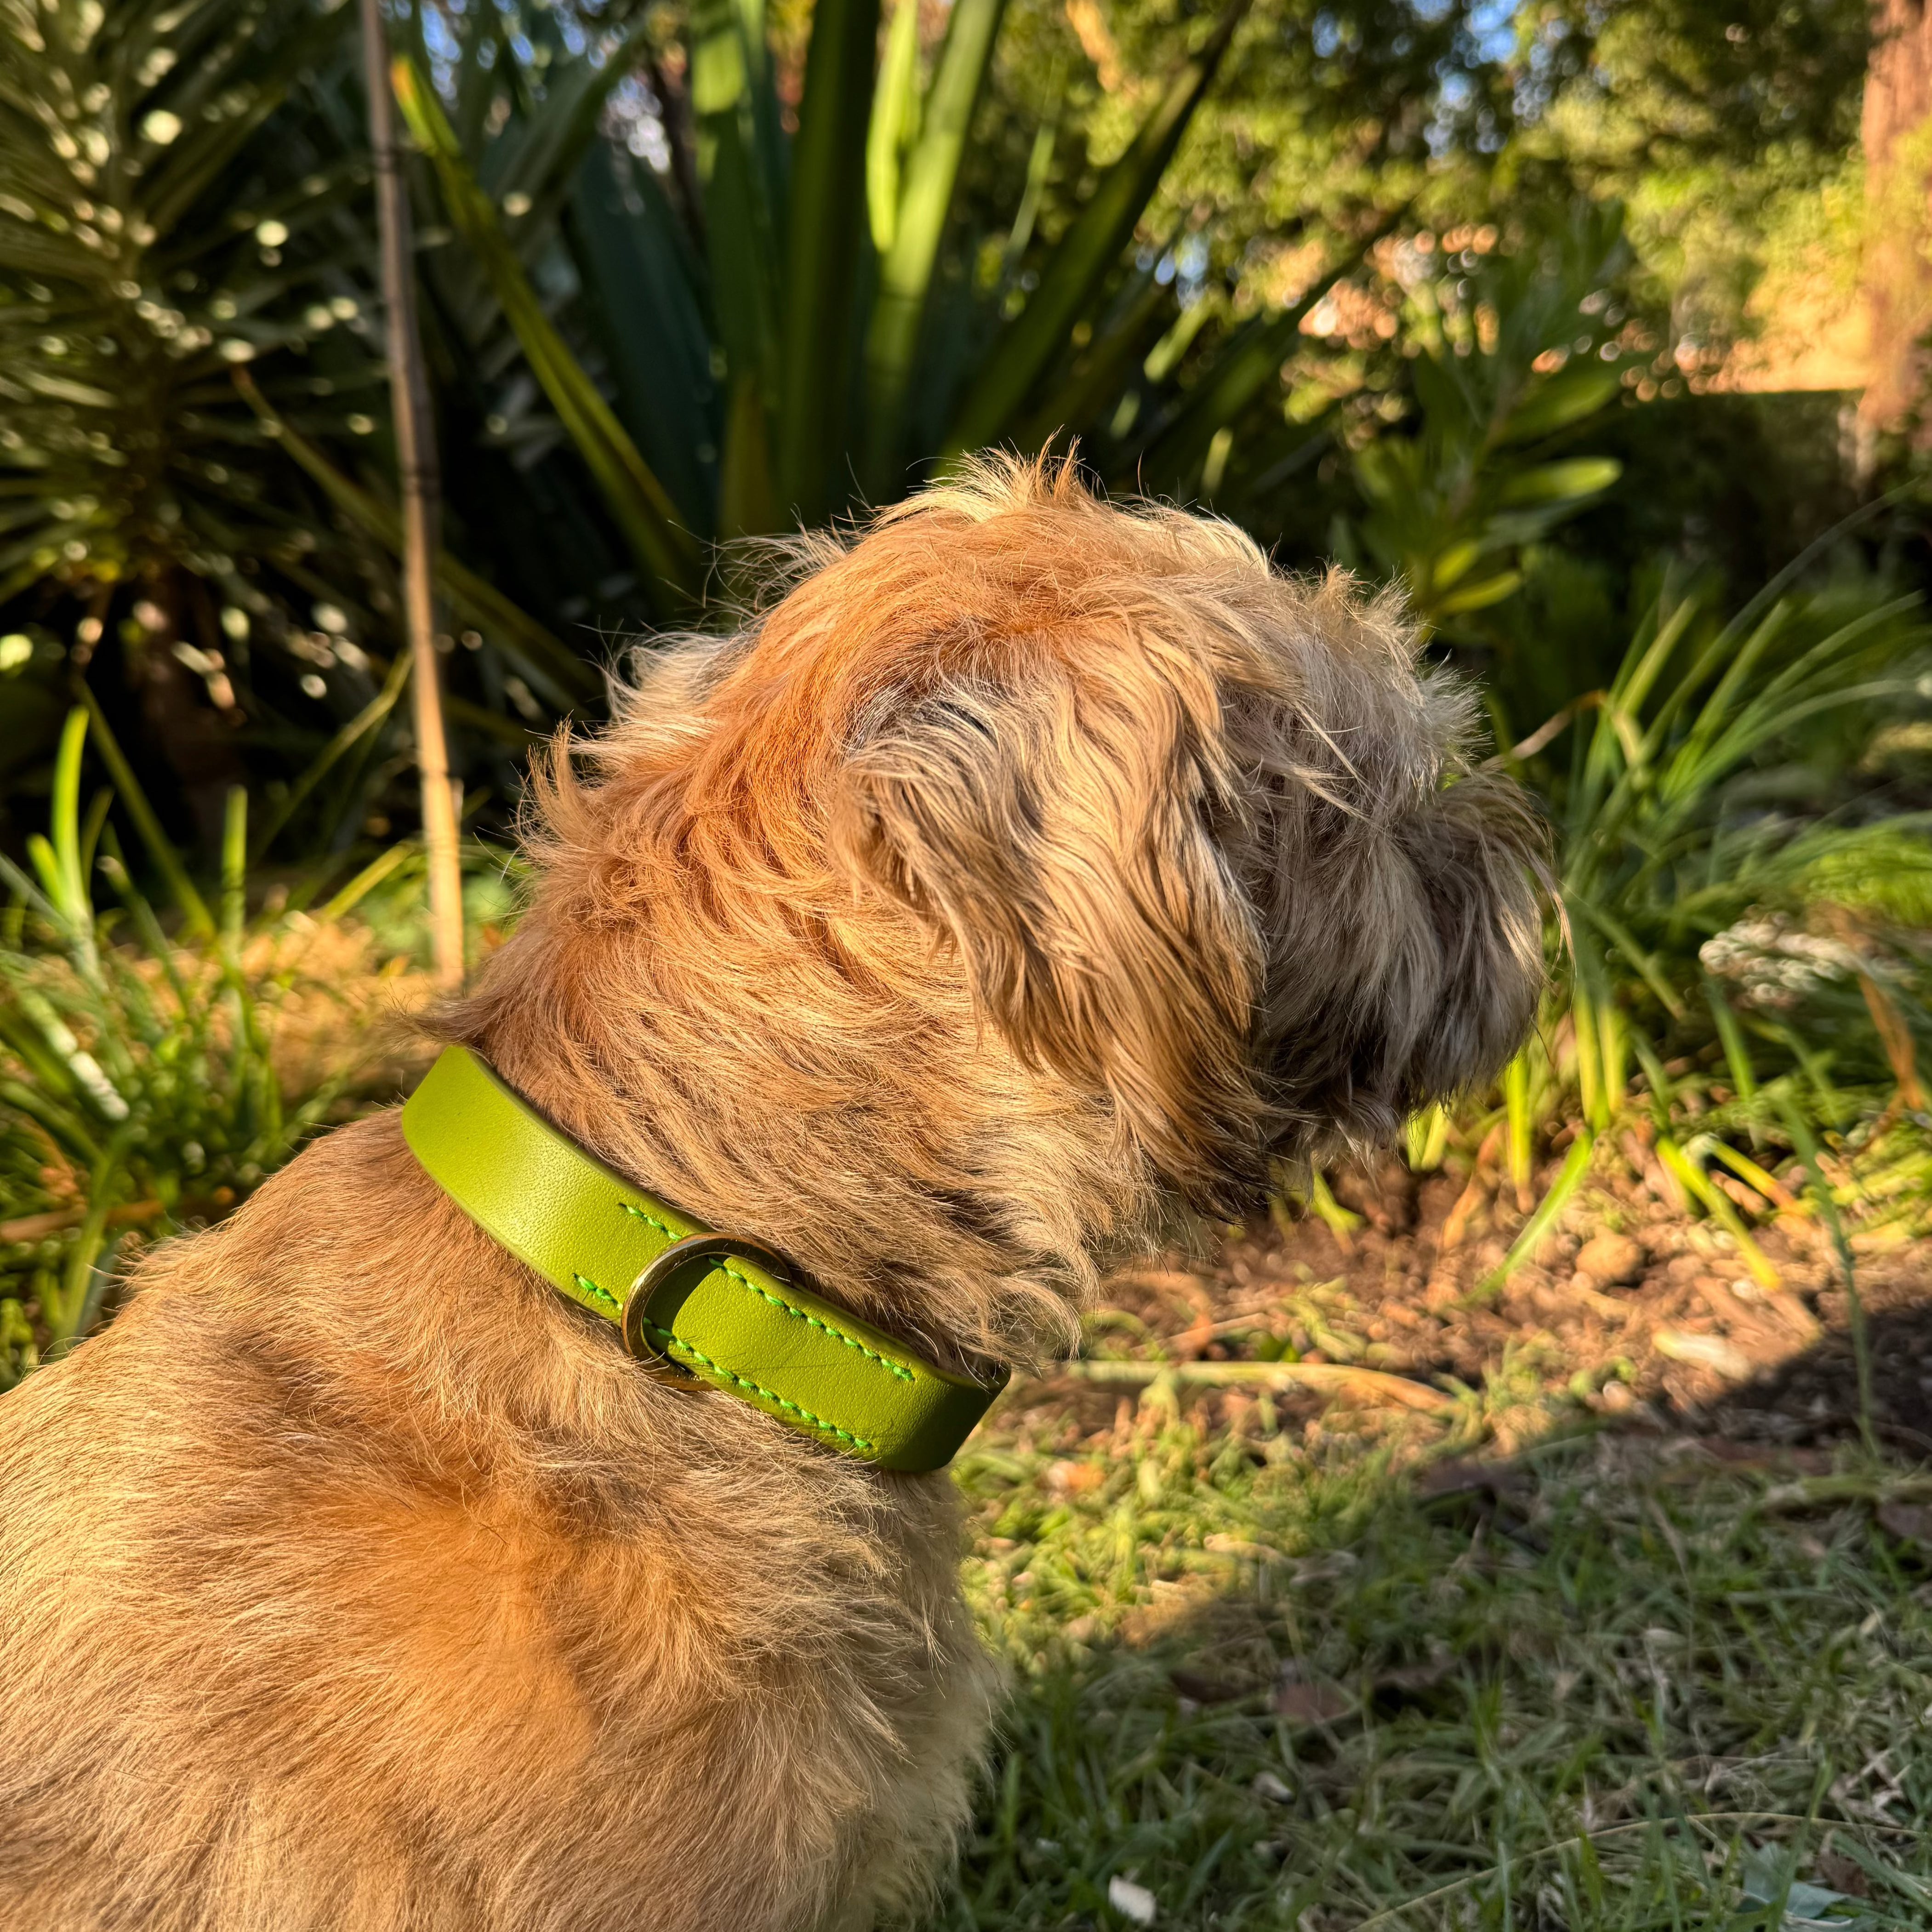 A small, scruffy brown dog with a light green Bald Collar Mantis from Georgie Paws that features antique brass hardware is sitting in a garden. The dog is turned to the right, displaying its side profile. The background features lush greenery including bushes and tall plants under a partly cloudy sky. Sunlight filters through the foliage, illuminating the scene with timeless elegance.